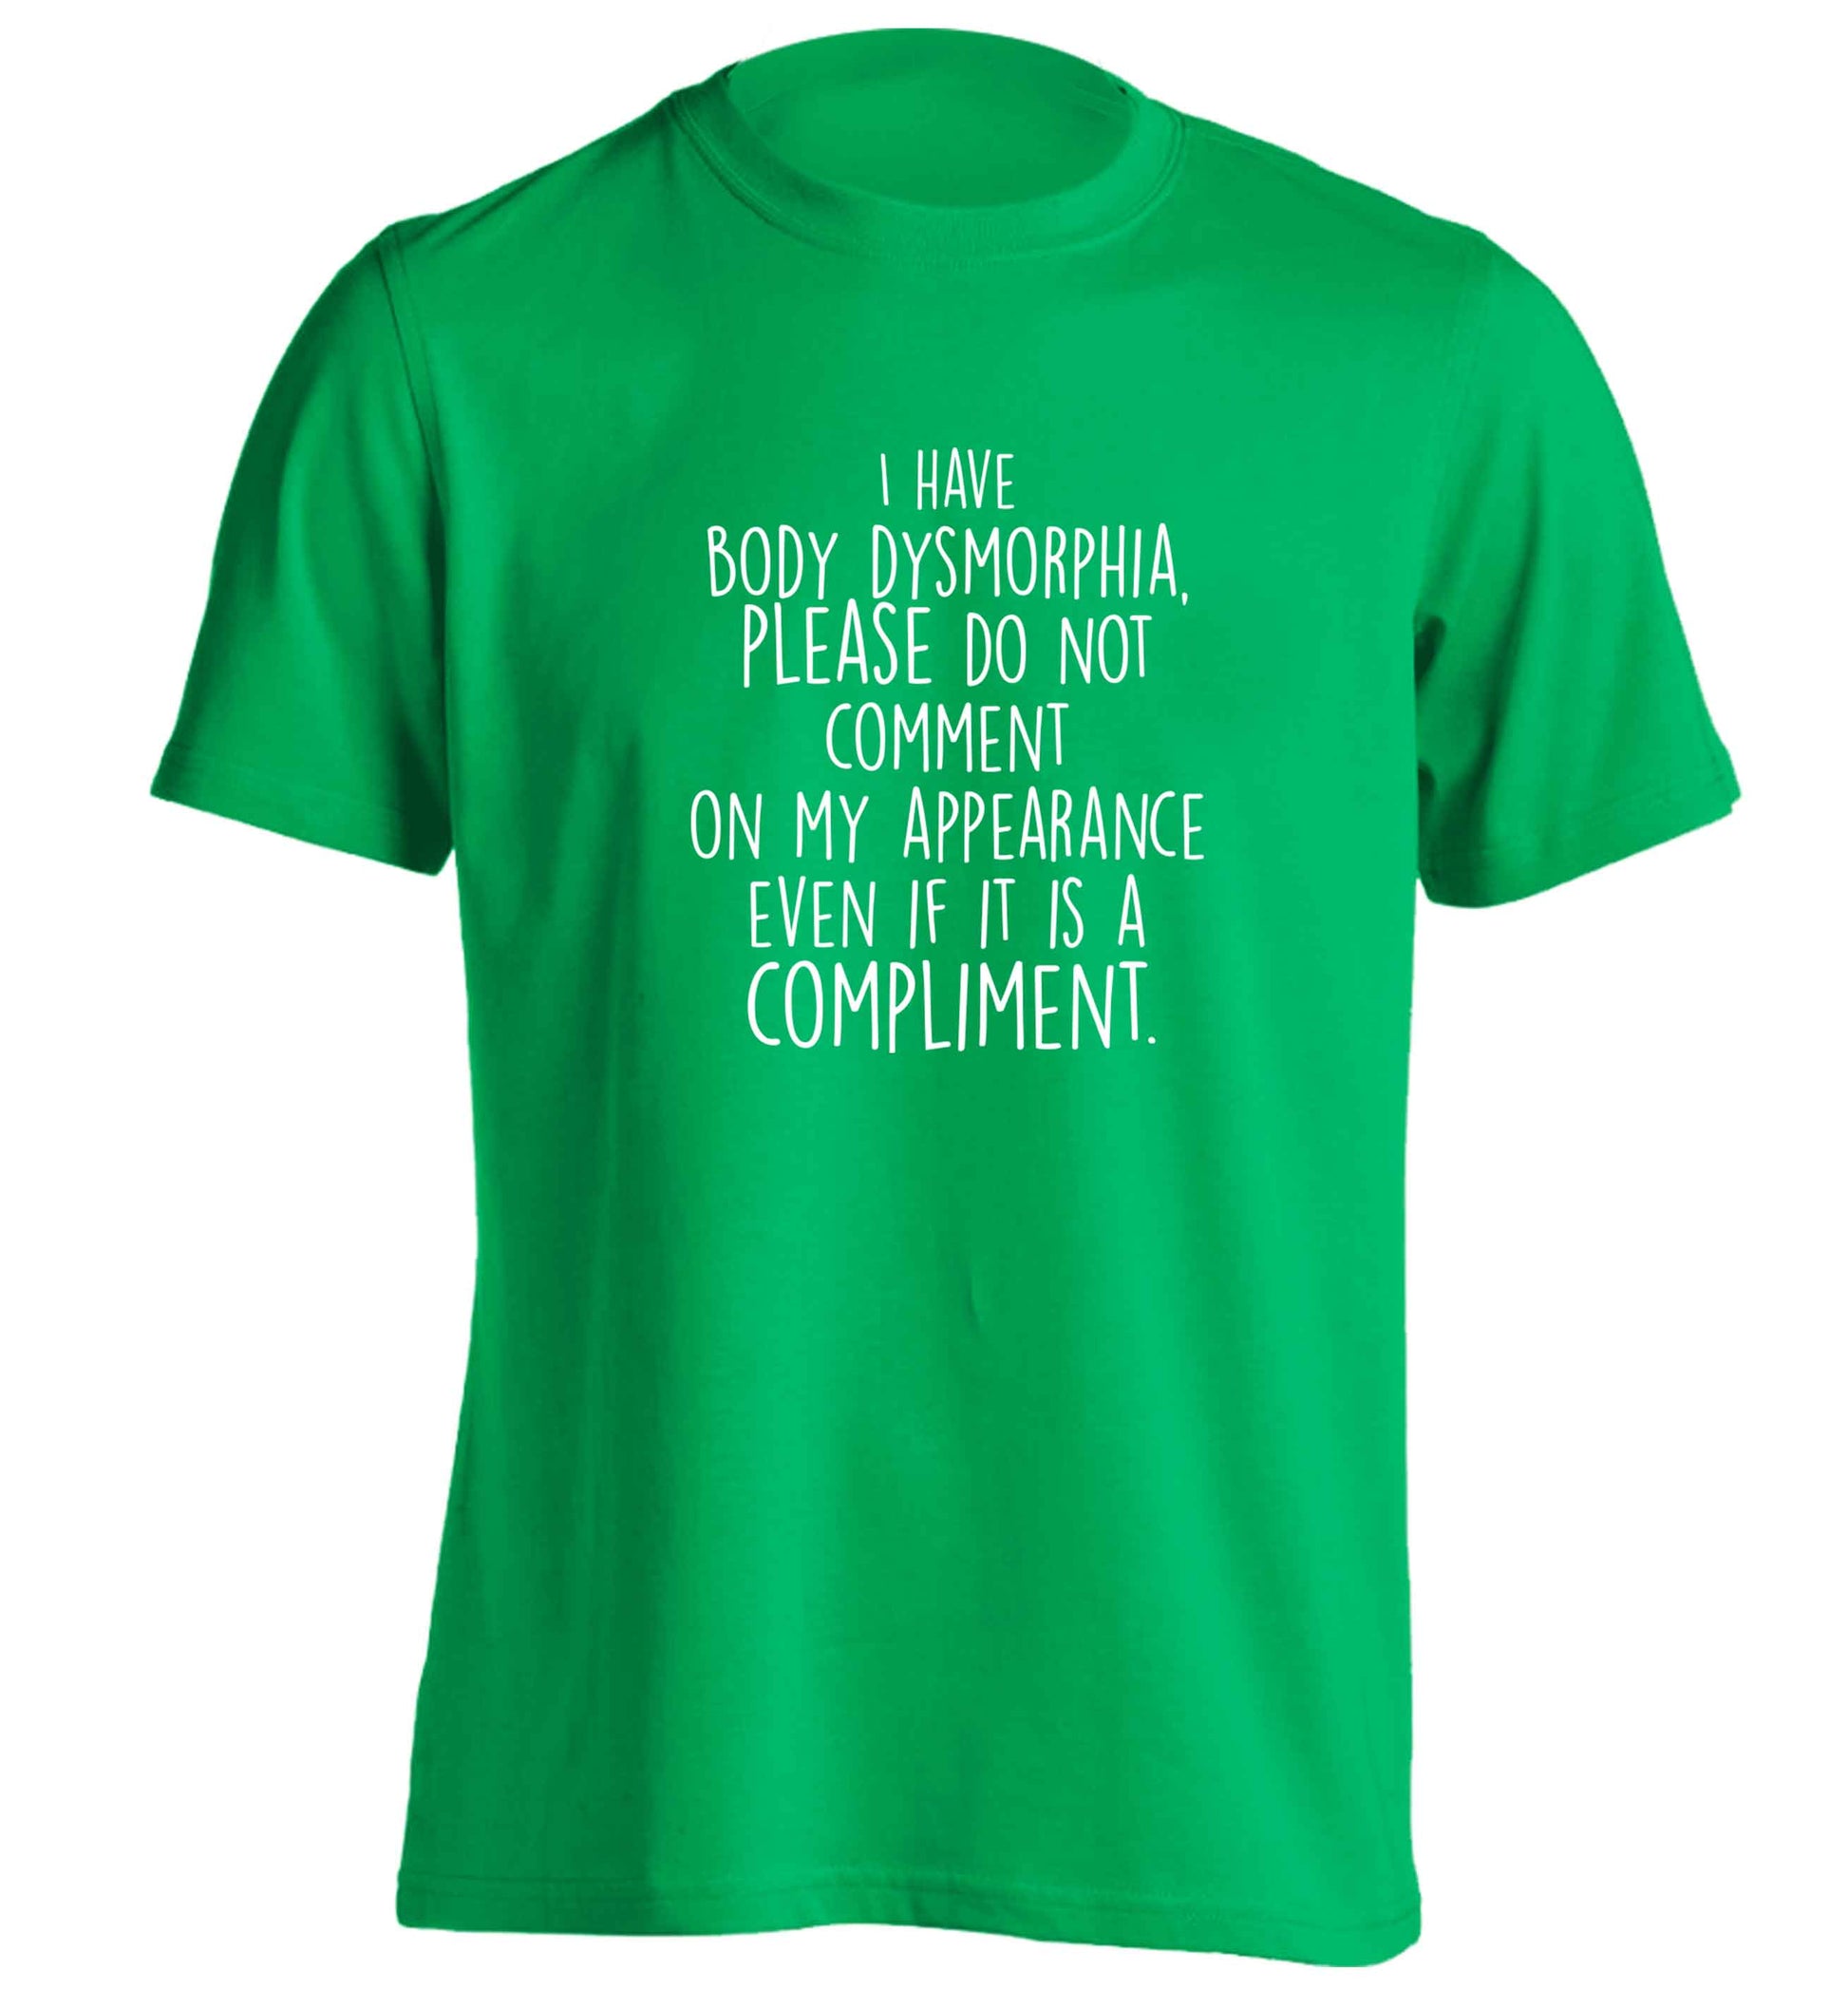 I have body dysmorphia, please do not comment on my appearance even if it is a compliment adults unisex green Tshirt 2XL